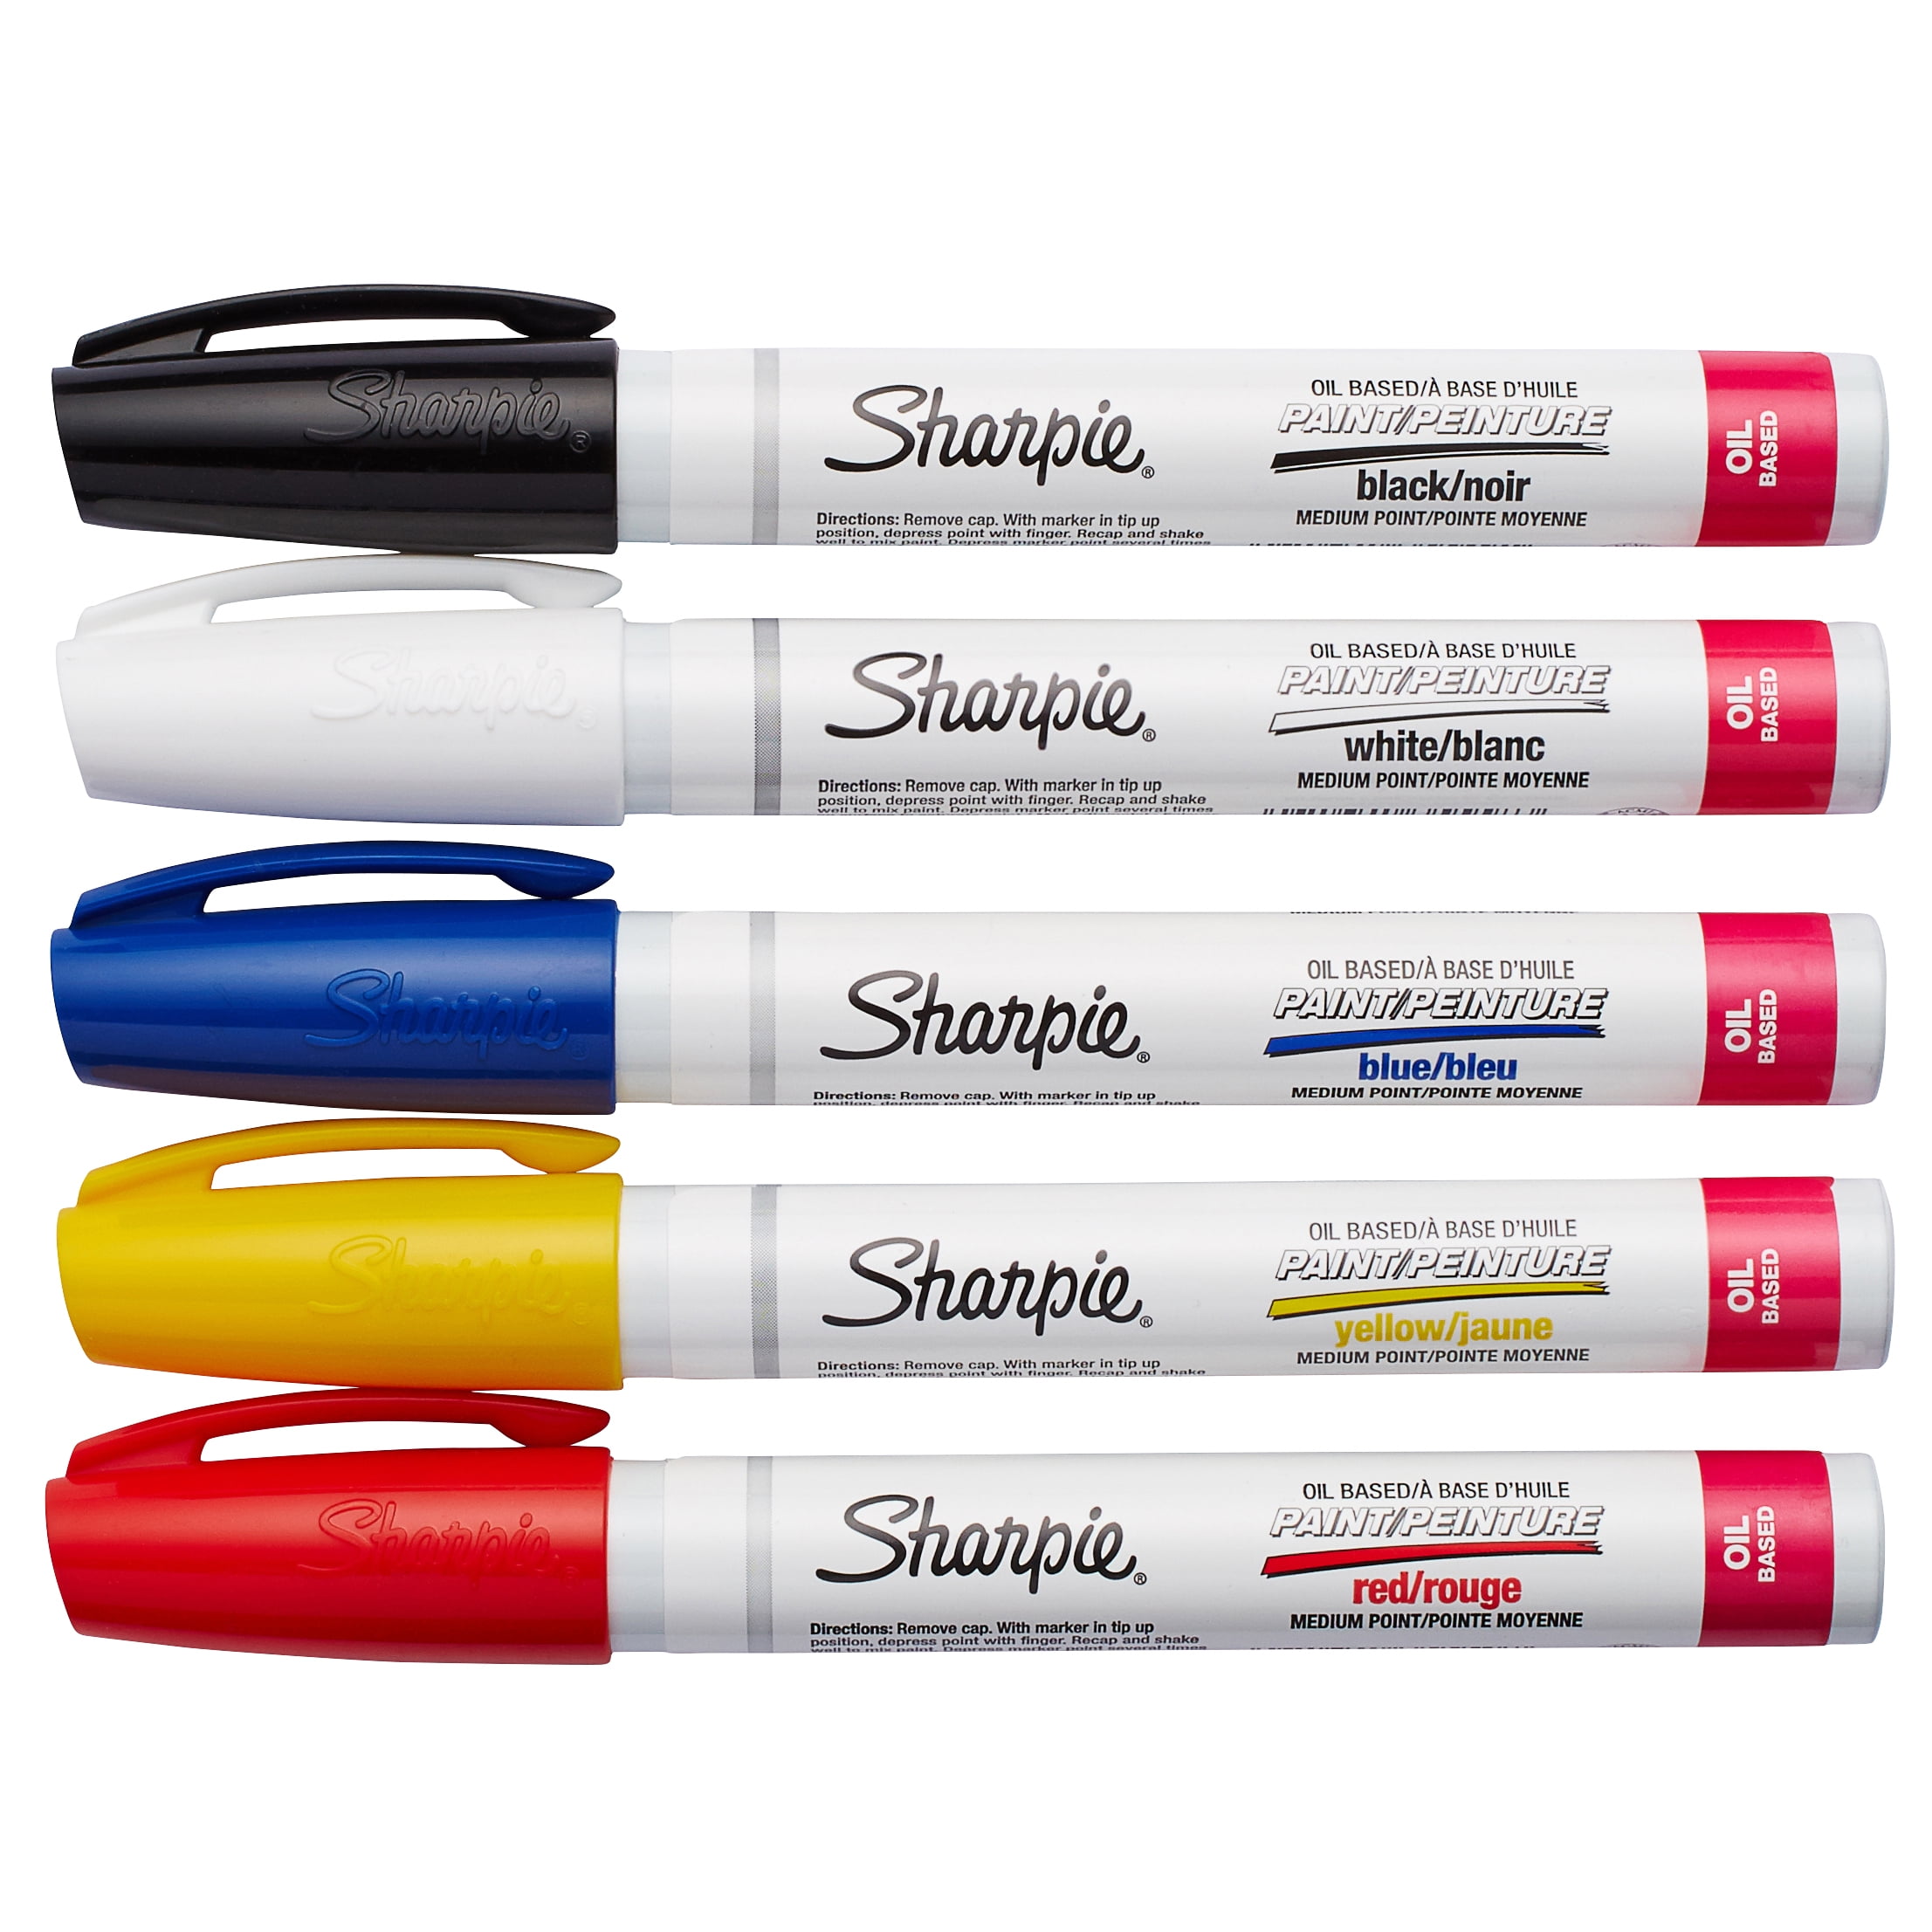 Sharpie Oil-based Paint Markers, Medium Point, Assorted Colors, 5 Count 